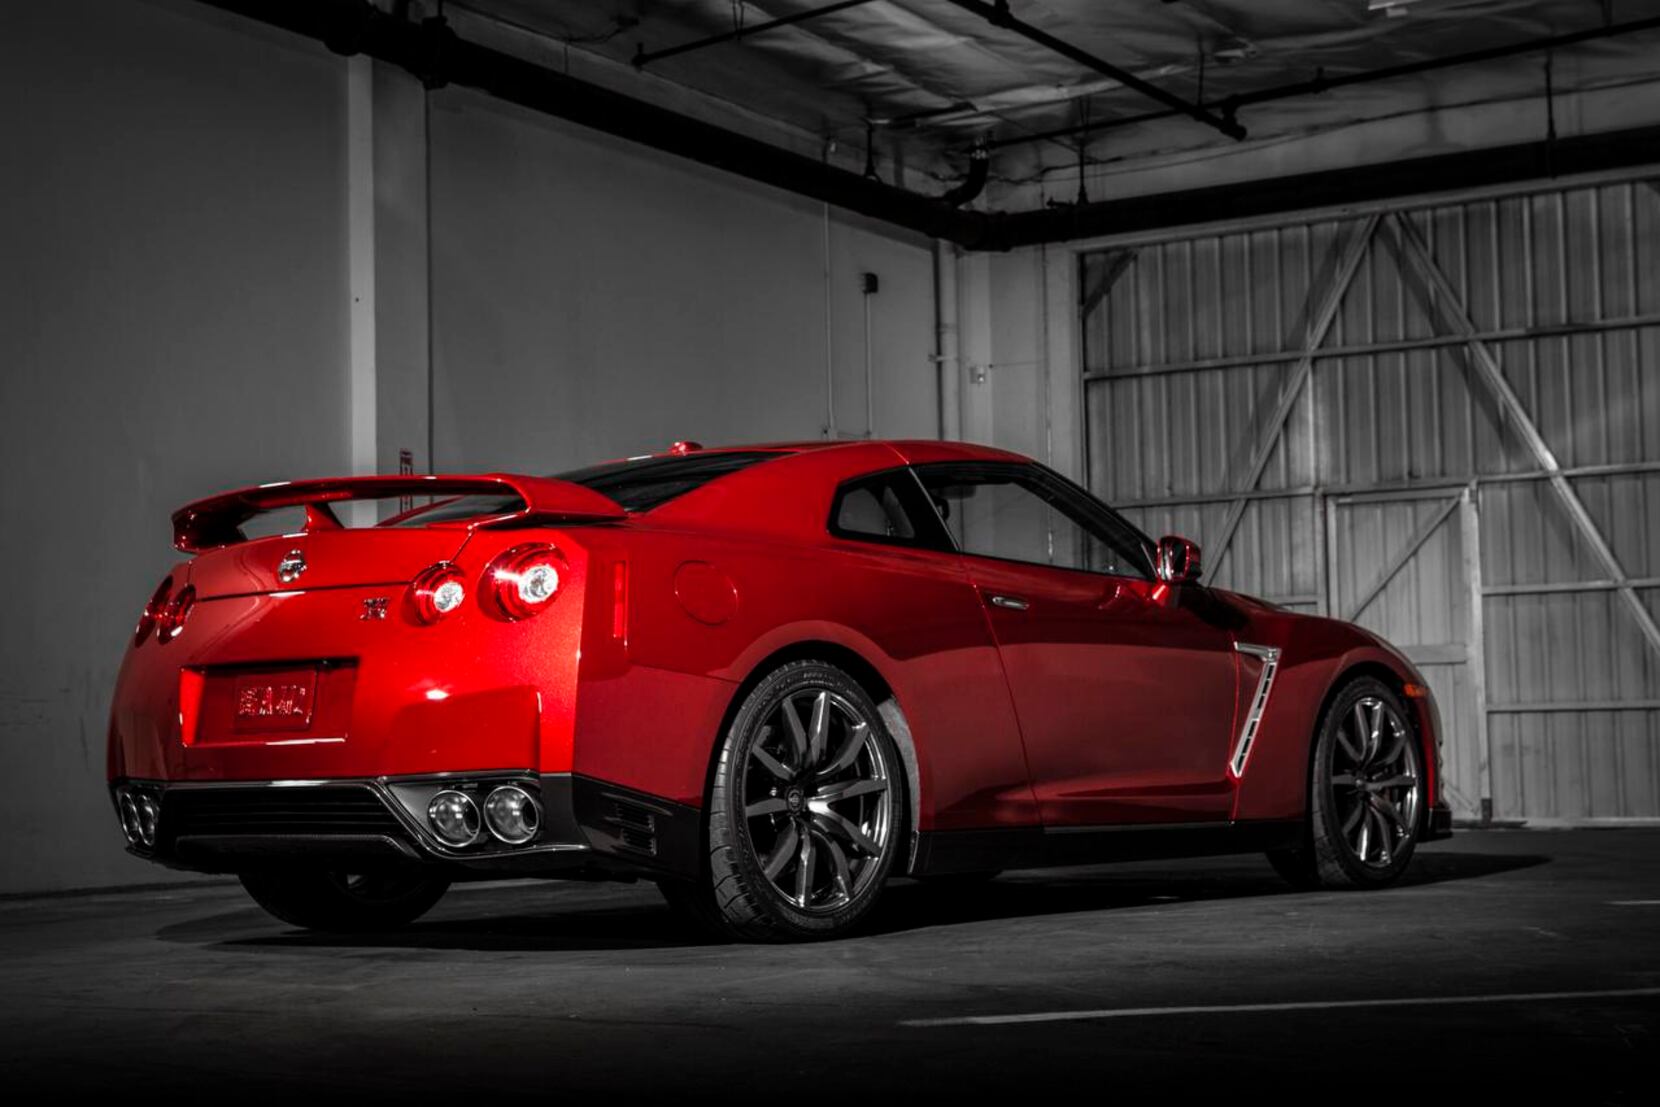 Parking Garage Nissan Gtr R Car That Has A Red Engine And Is